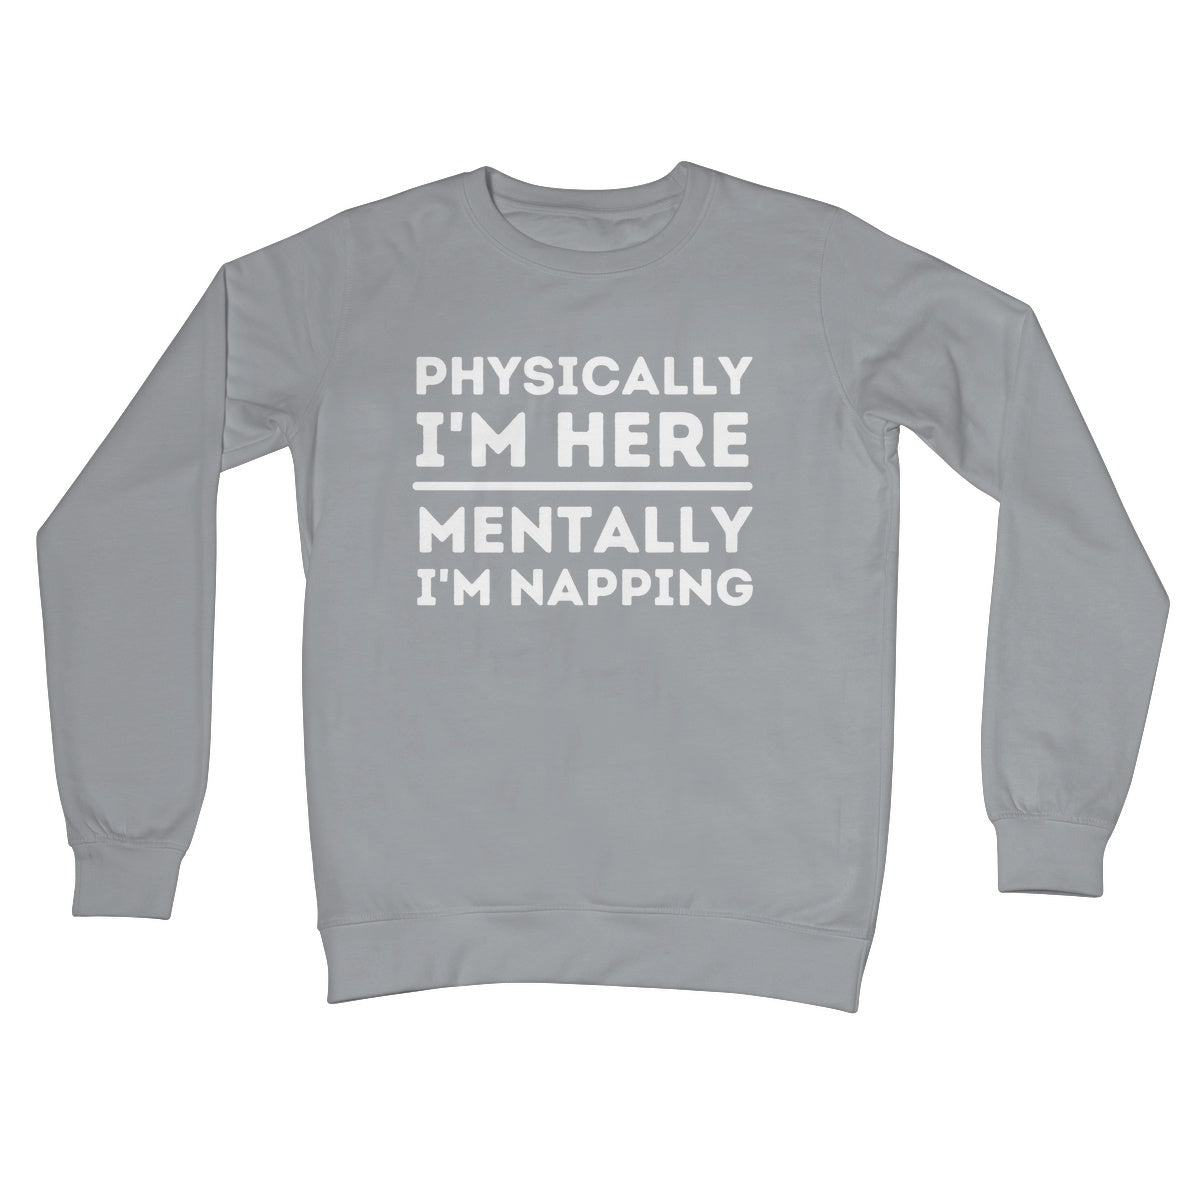 Physically here mentally I'm napping jumper grey